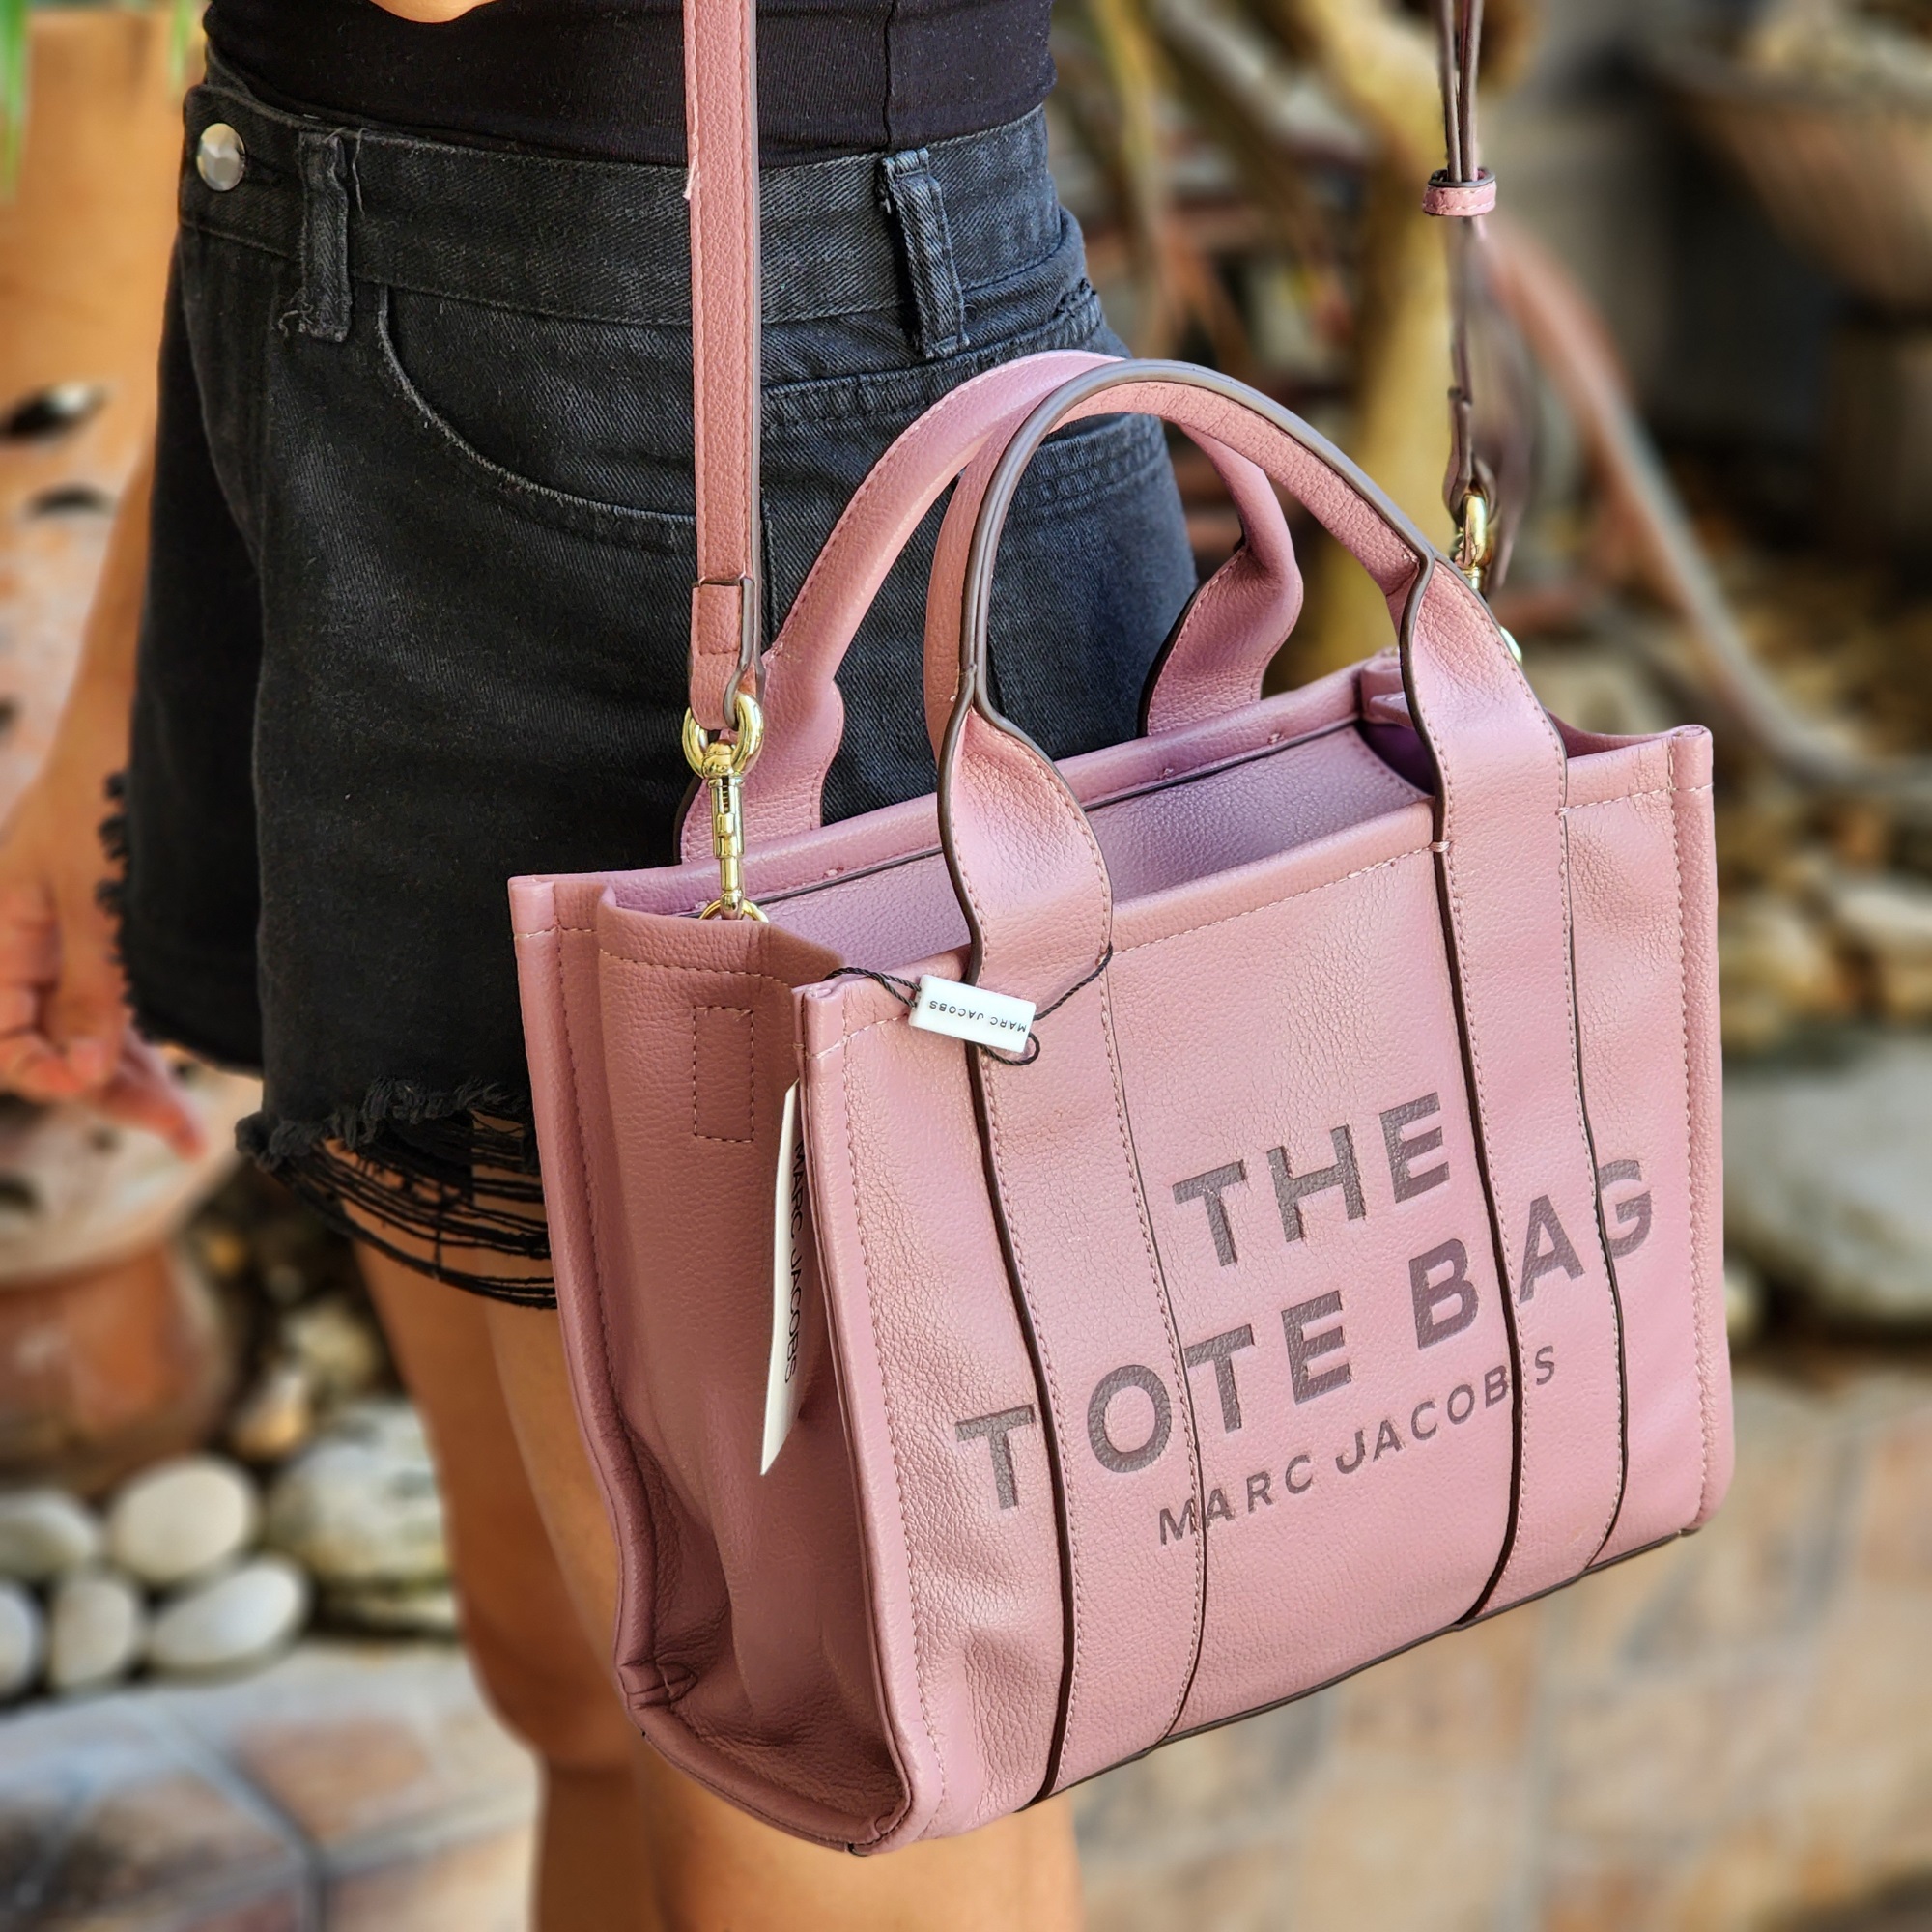 Marc Jacobs - THE SMALL TOTE BAG in Aloe. This item is